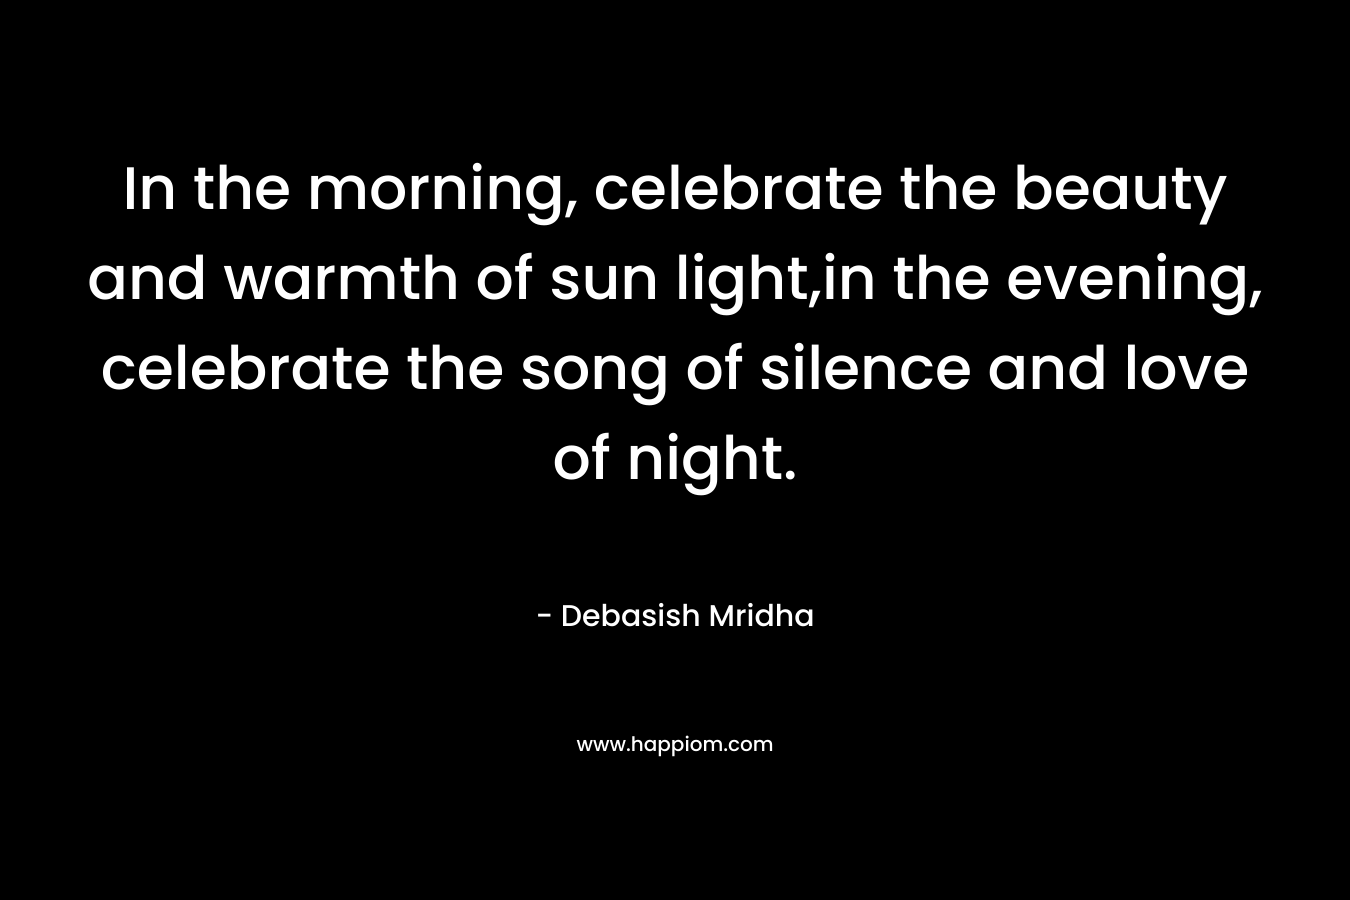 In the morning, celebrate the beauty and warmth of sun light,in the evening, celebrate the song of silence and love of night.